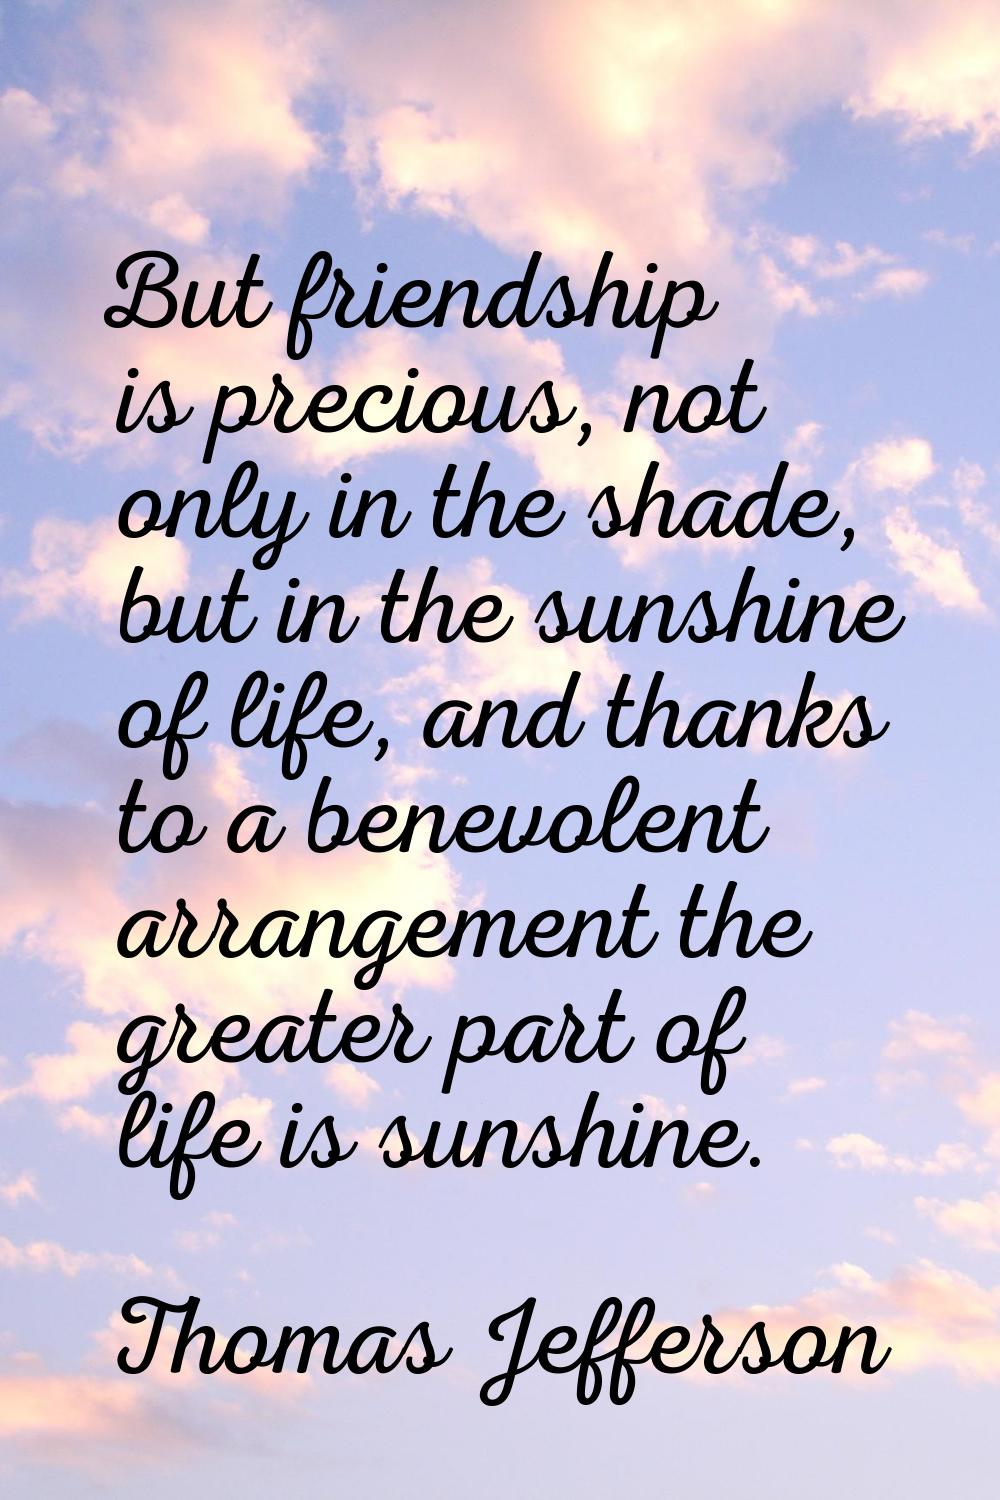 But friendship is precious, not only in the shade, but in the sunshine of life, and thanks to a ben